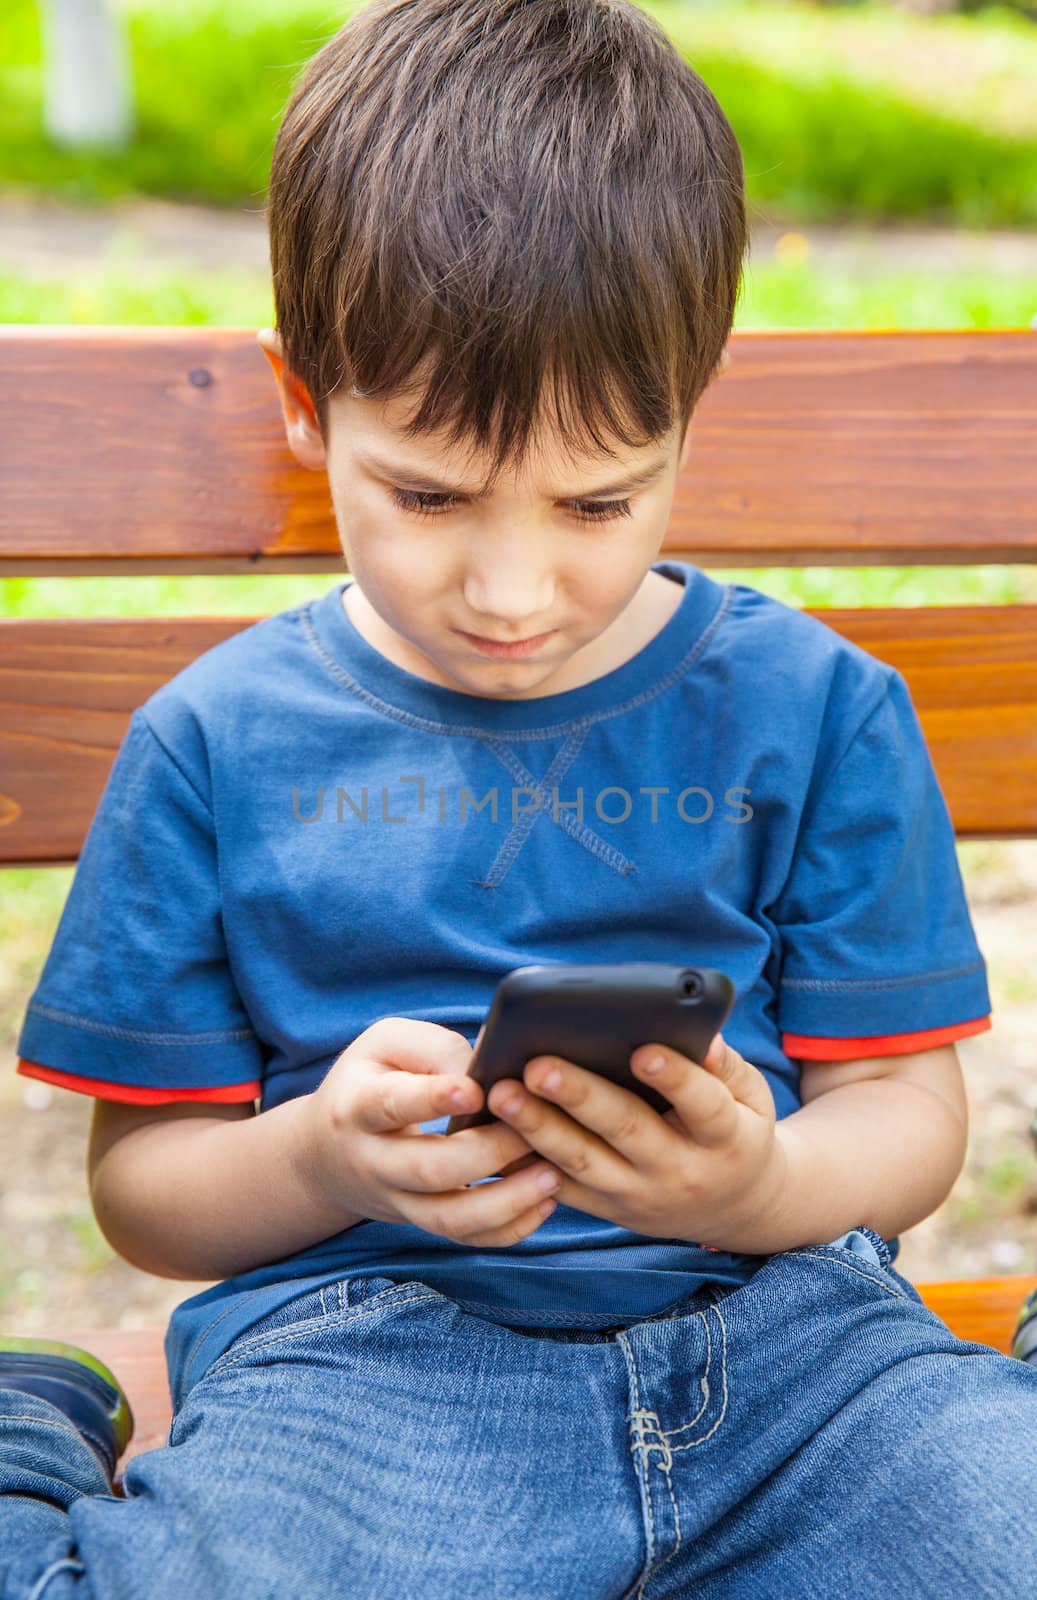 boy playing games on smartphone by palinchak